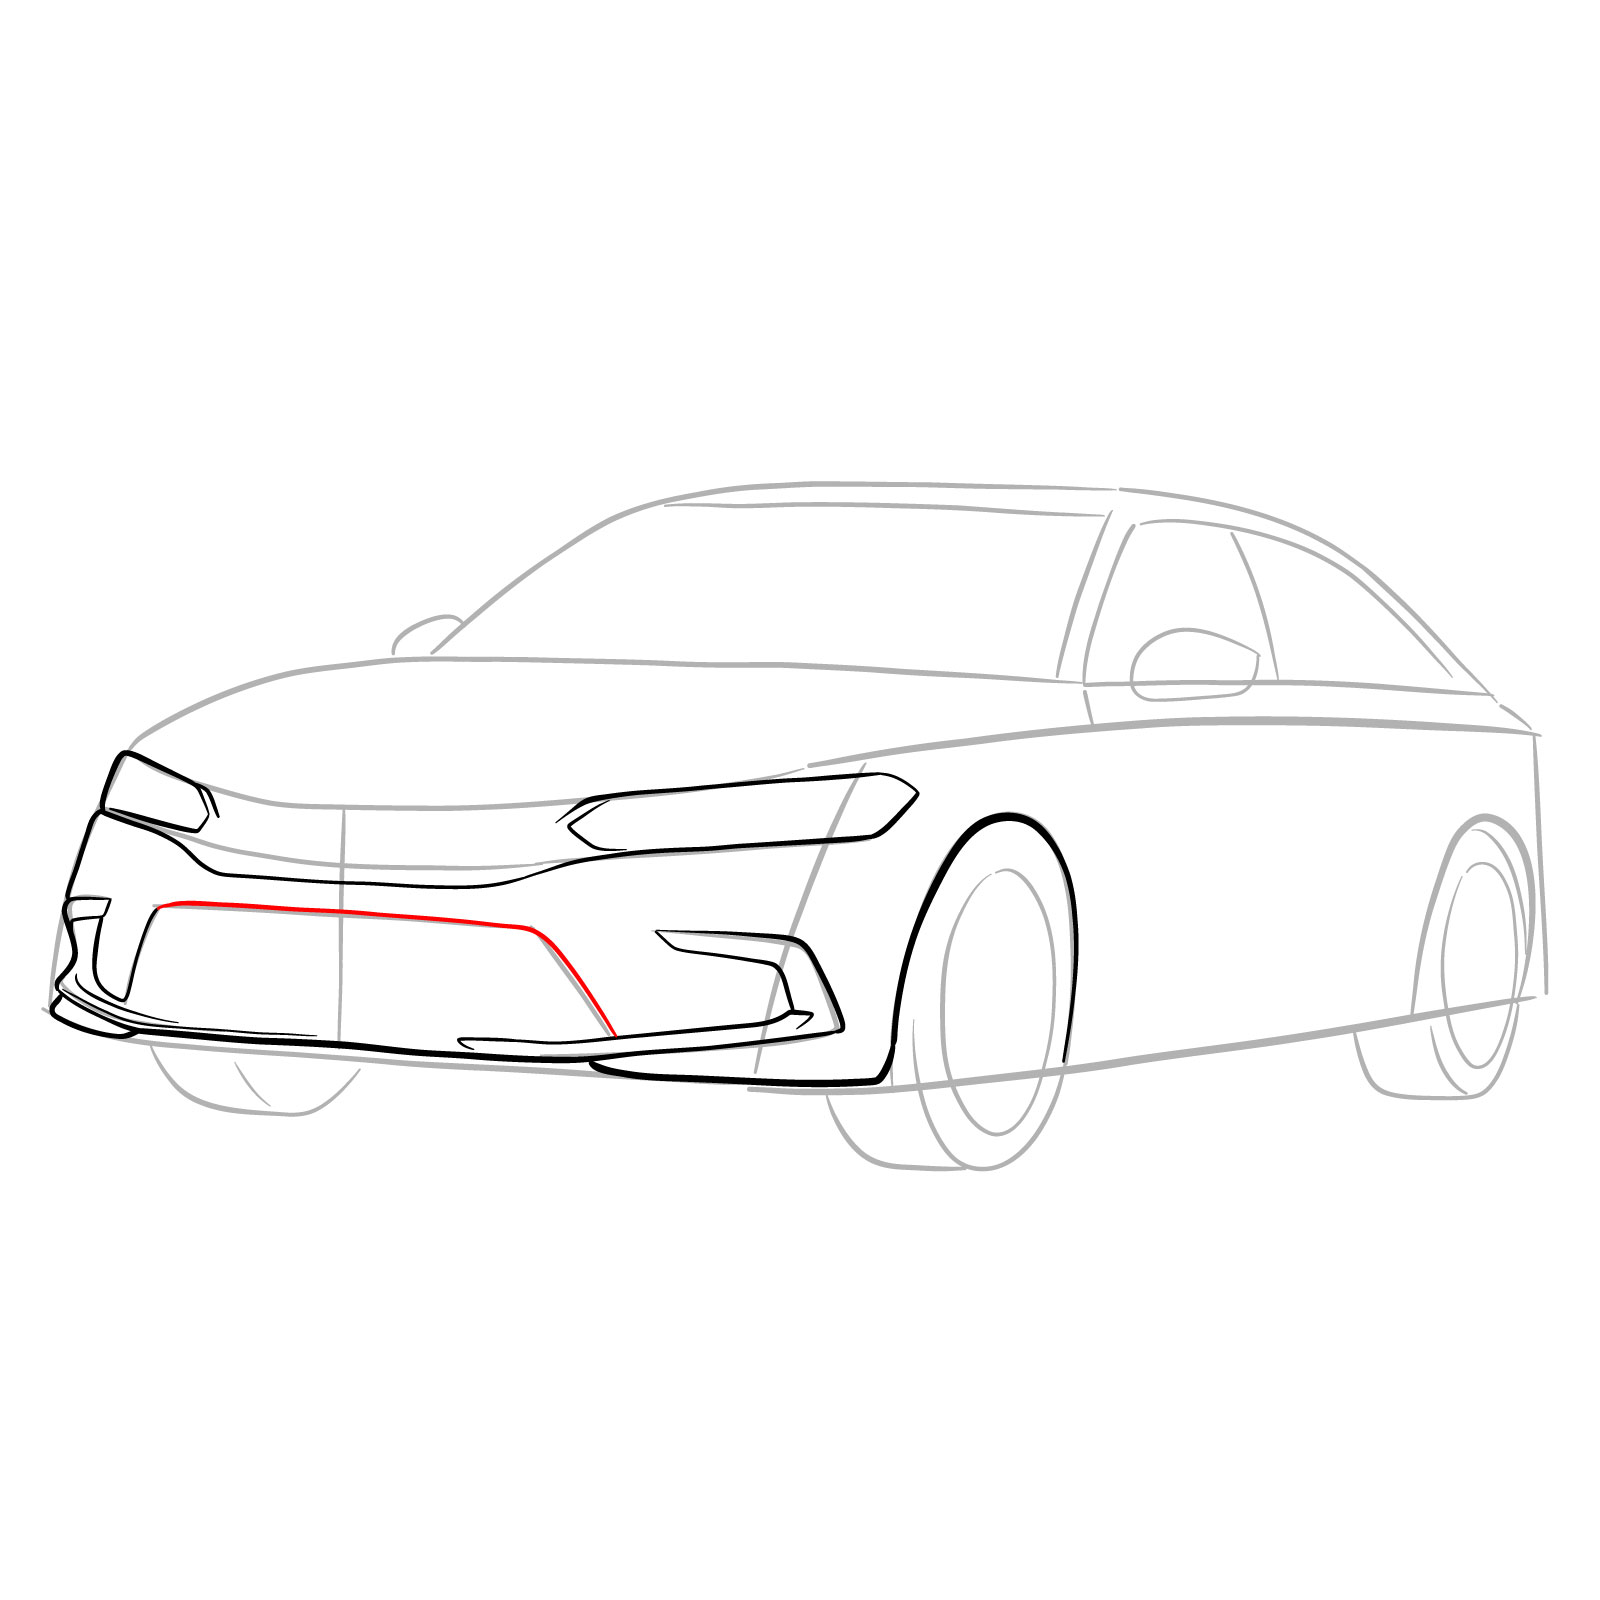 How to draw a 2022 Honda Civic - step 10